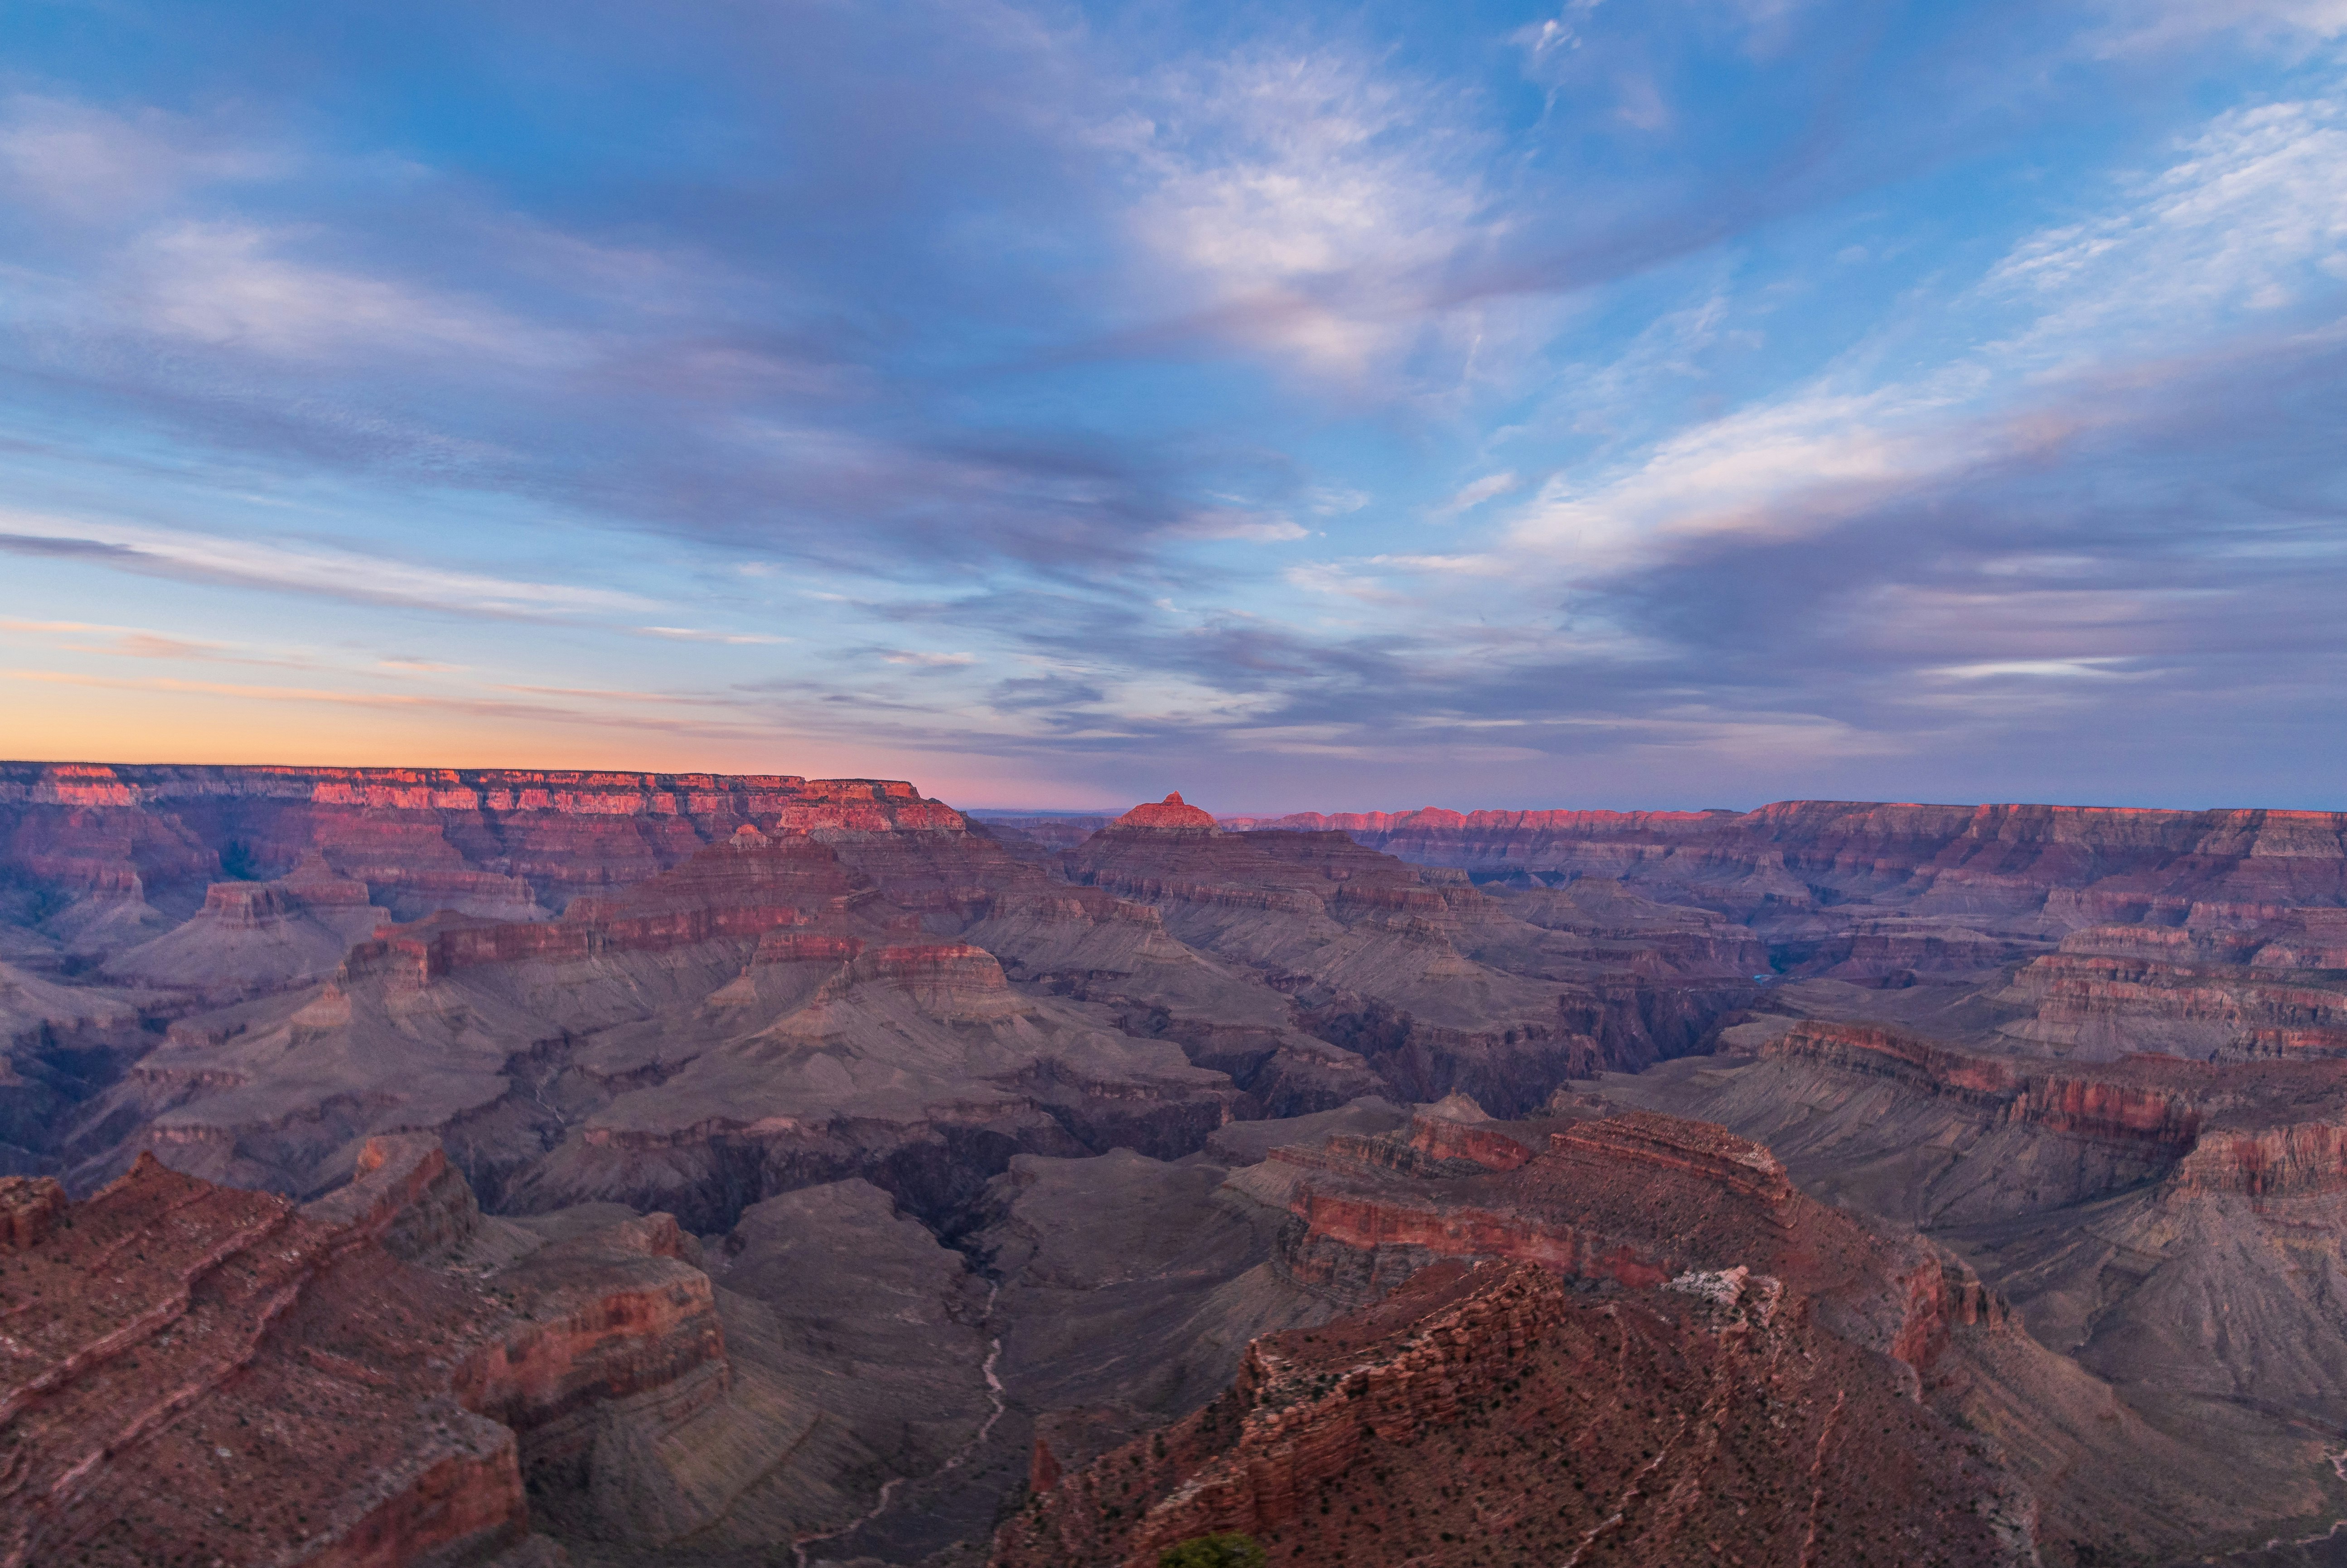 A wide shot of the Grand Canyon from a high overlook